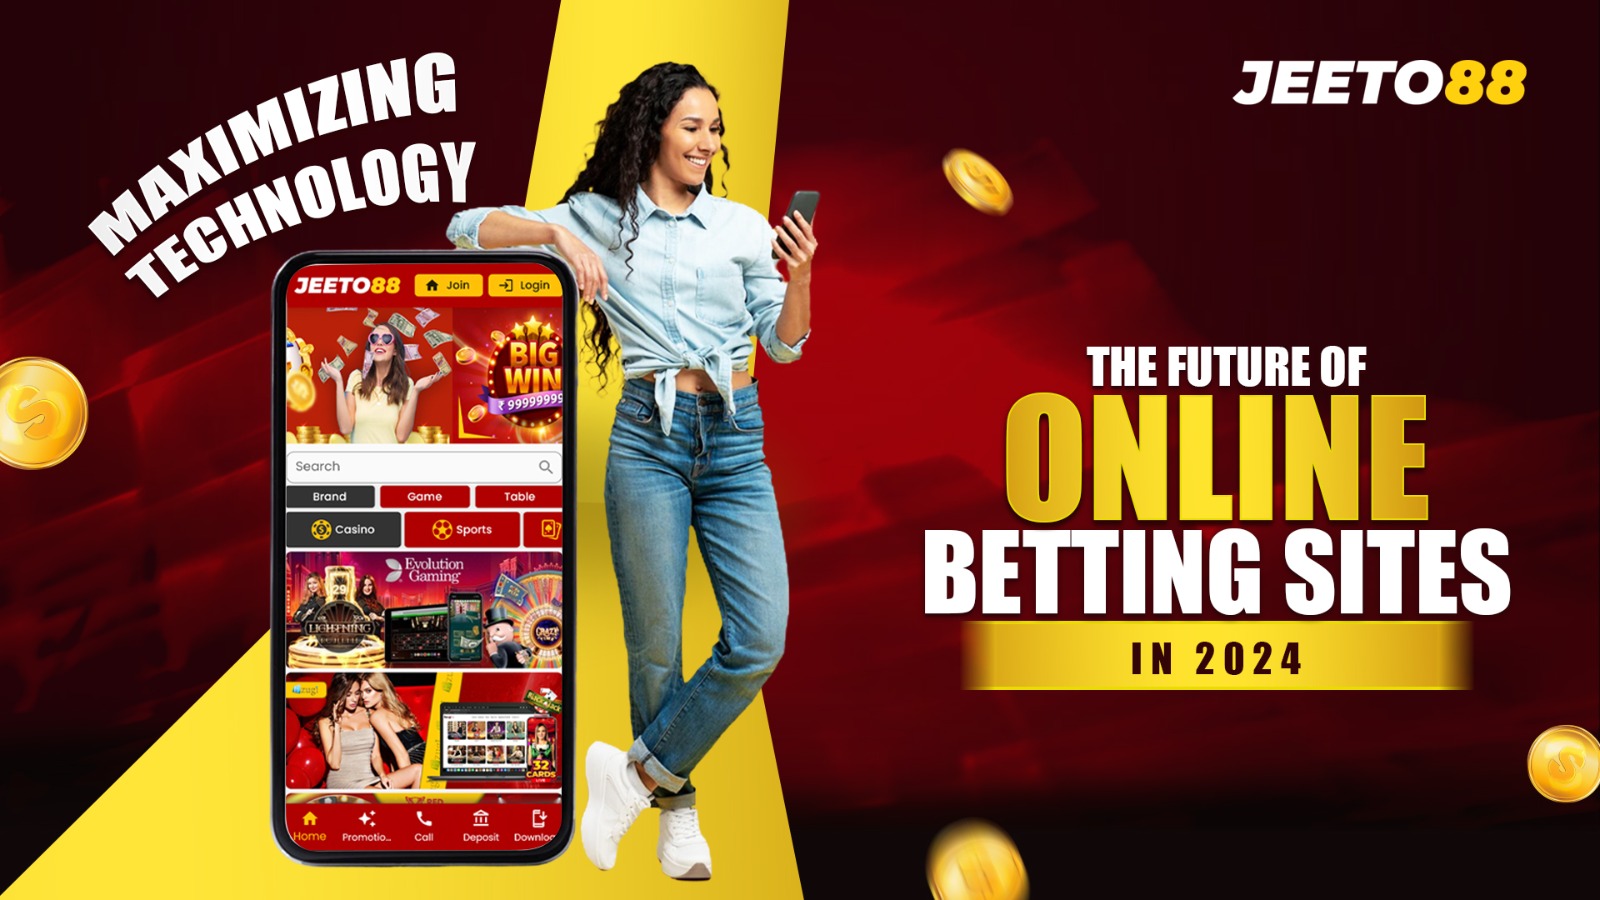 Maximizing Technology: Future Online Betting Sites in 2024 – A4Everyone